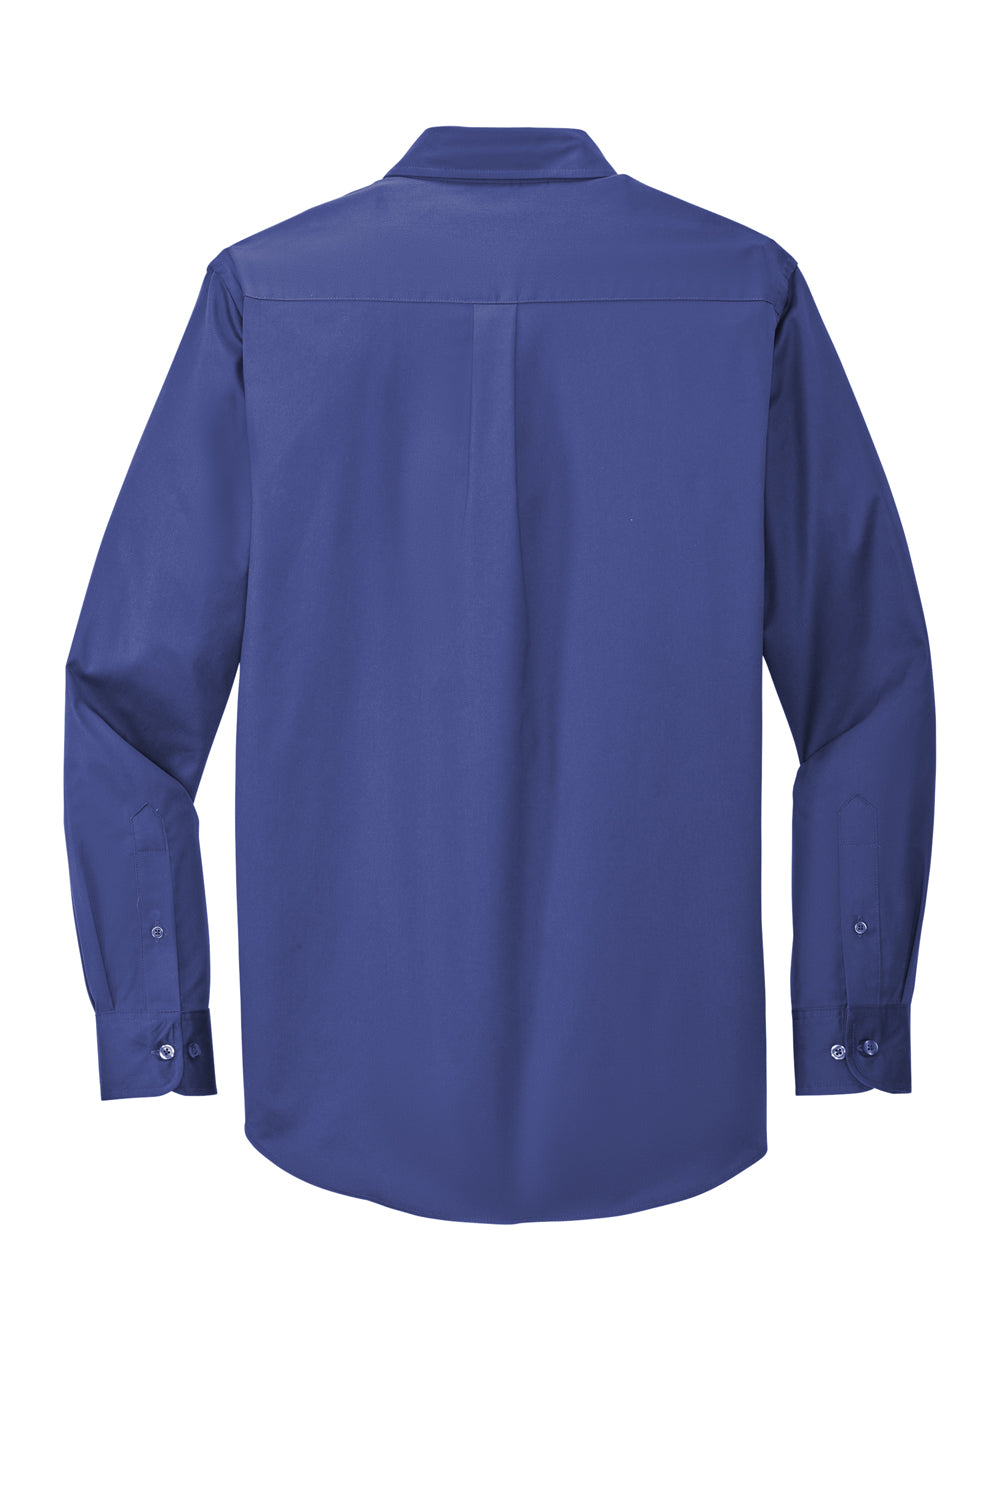 Port Authority S608/TLS608/S608ES Mens Easy Care Wrinkle Resistant Long Sleeve Button Down Shirt w/ Pocket Mediterranean Blue Flat Back